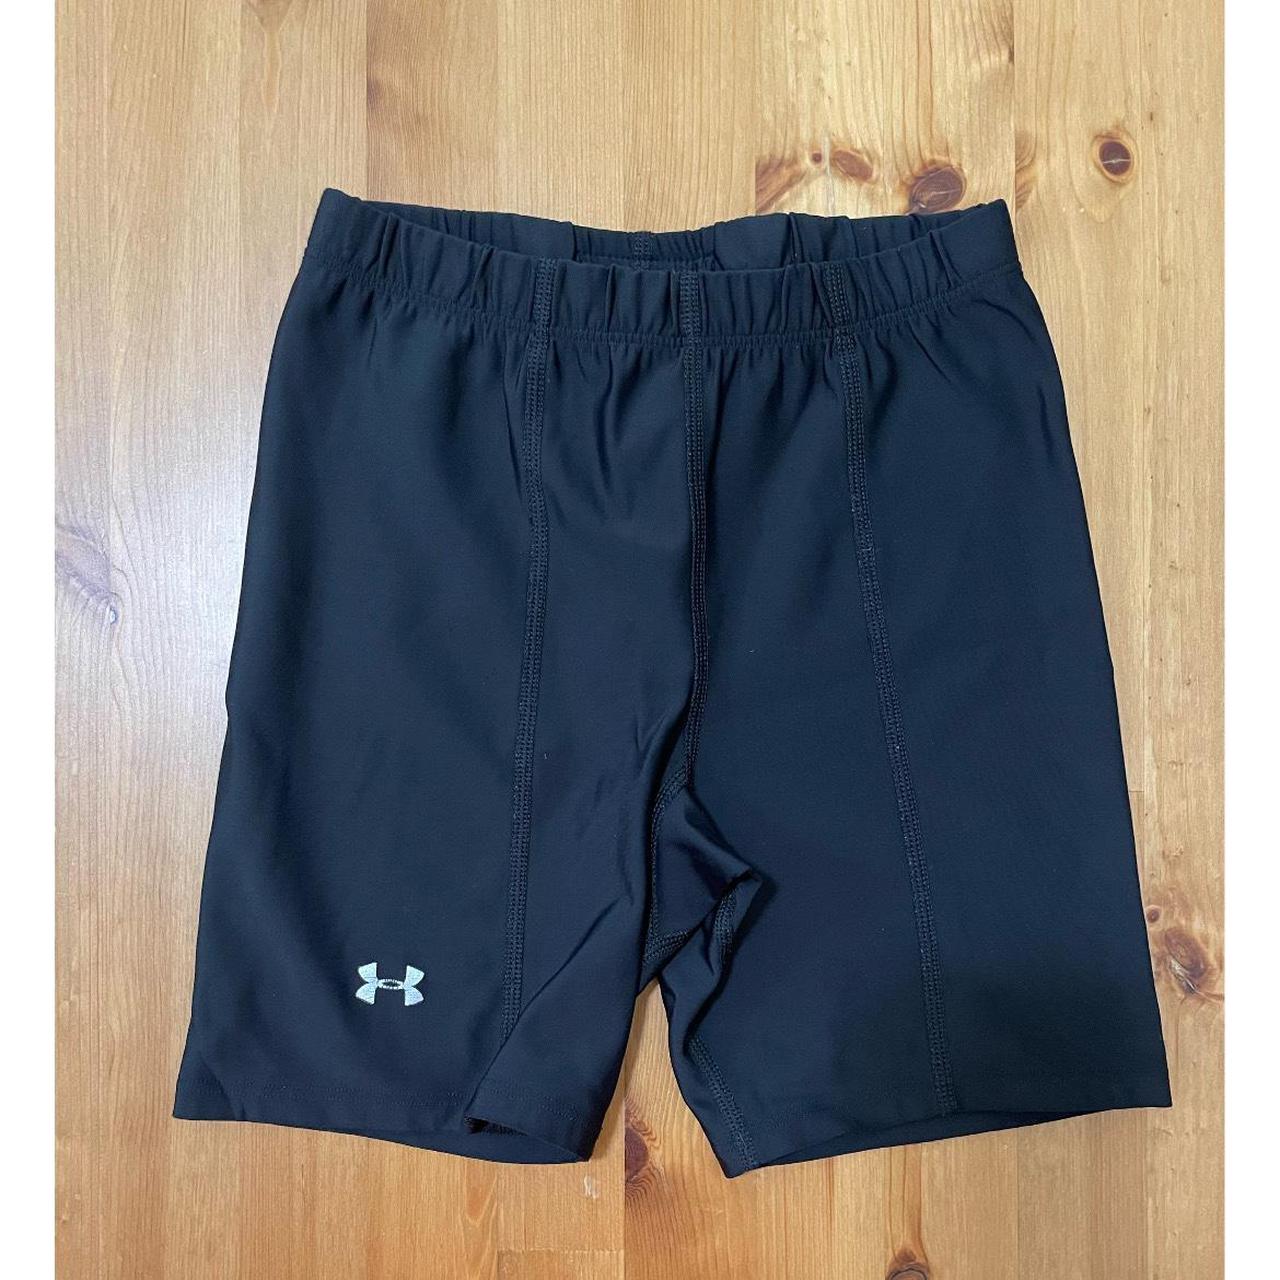 Under Armor - Bike Shorts 🖤🖤 Size: Extra Small. 85% - Depop